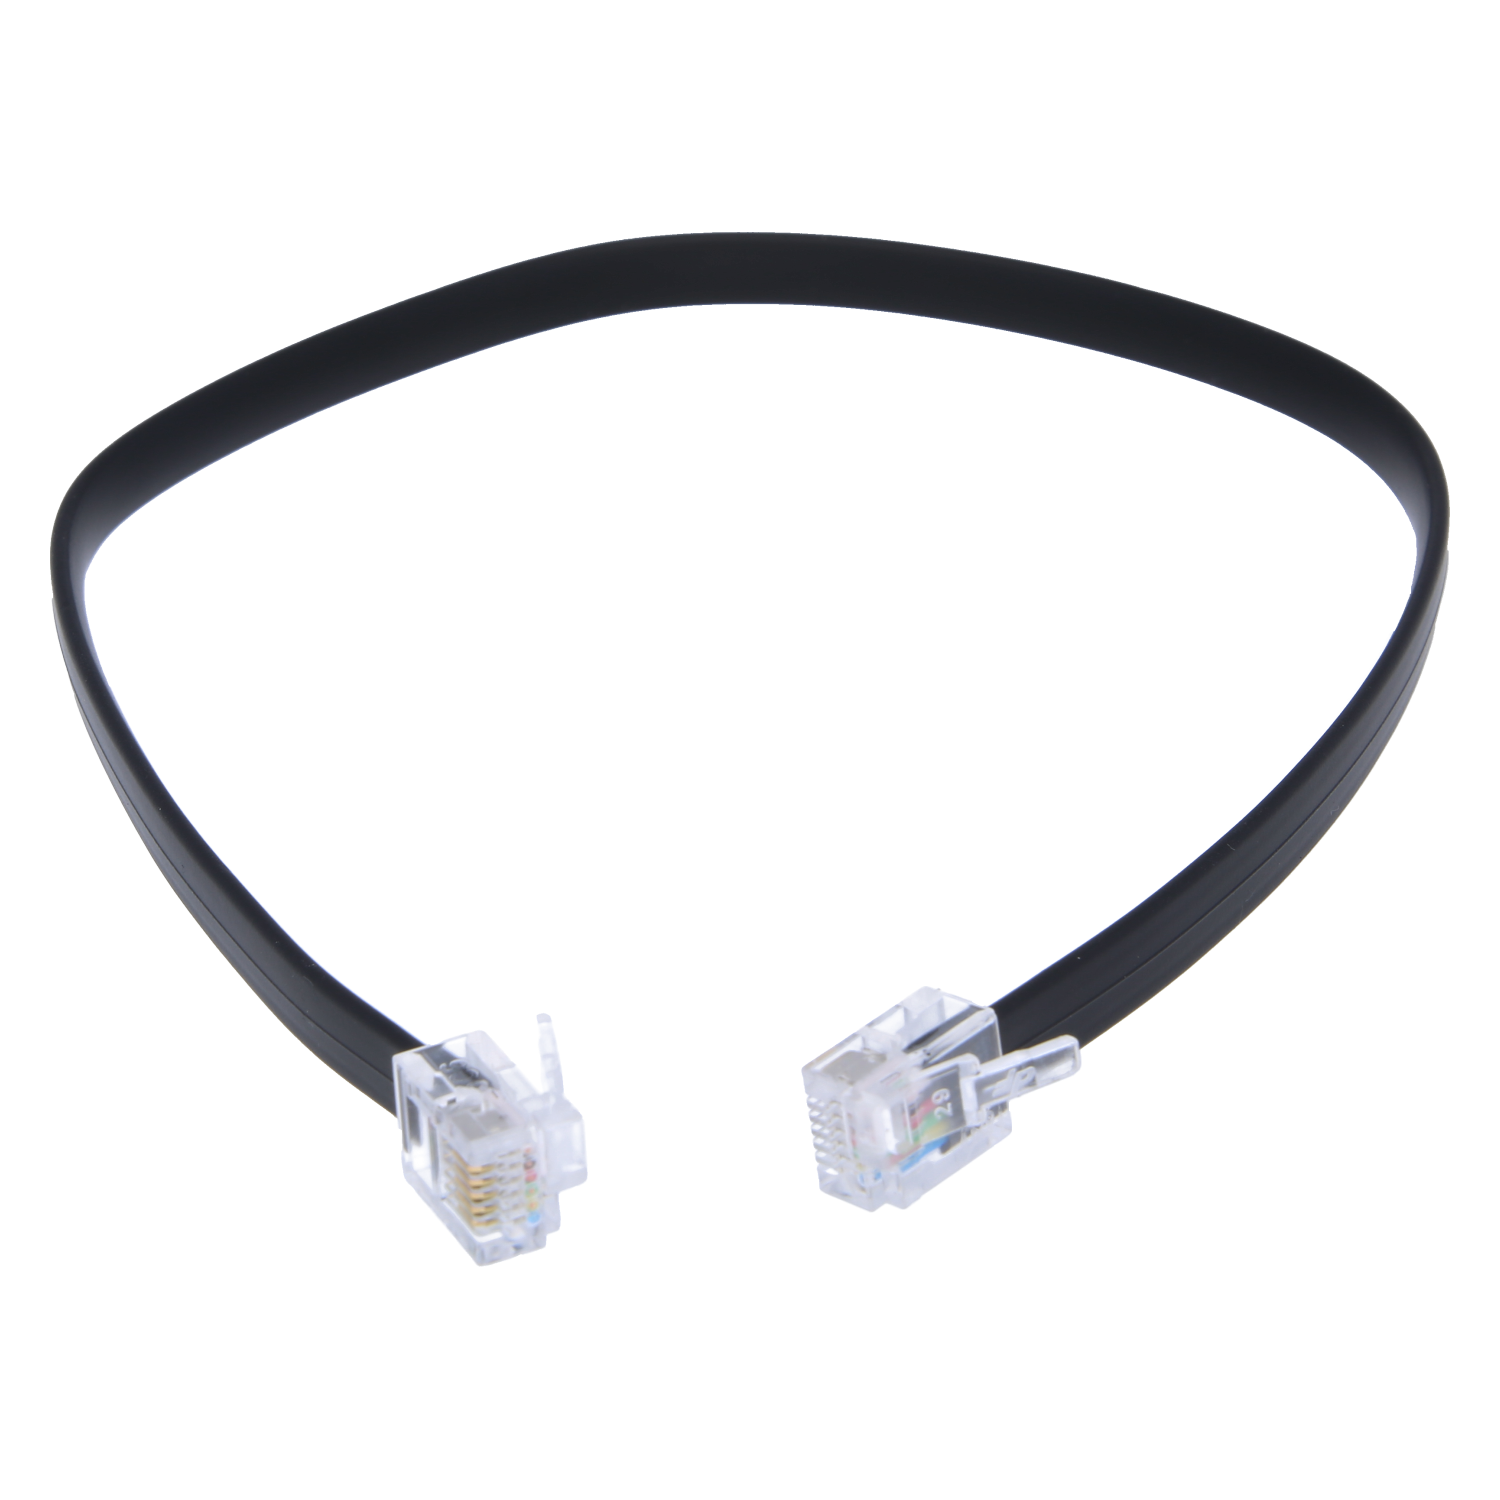 LEGO cable - Mindstorms NXT connecting cable (black, 35 cm)